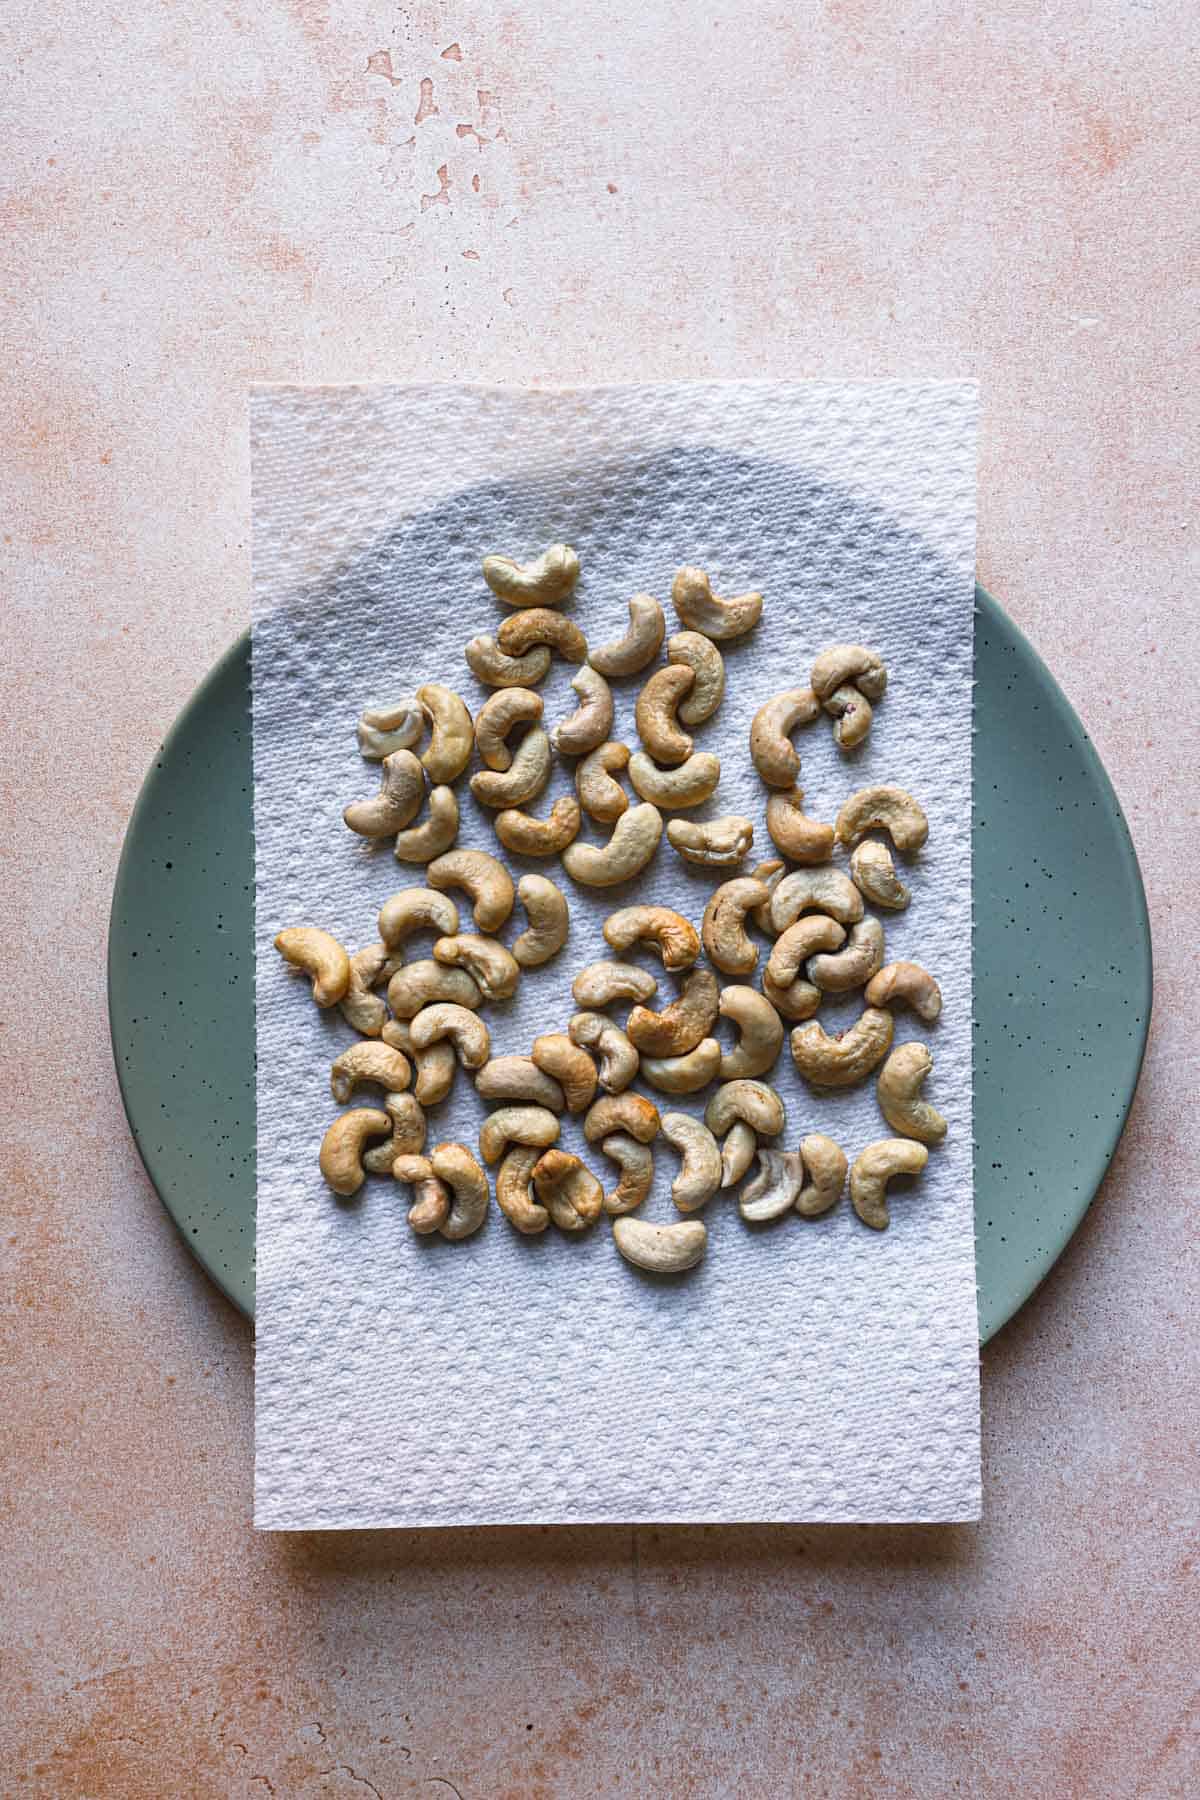 Cashews in a plate over a paper towel.